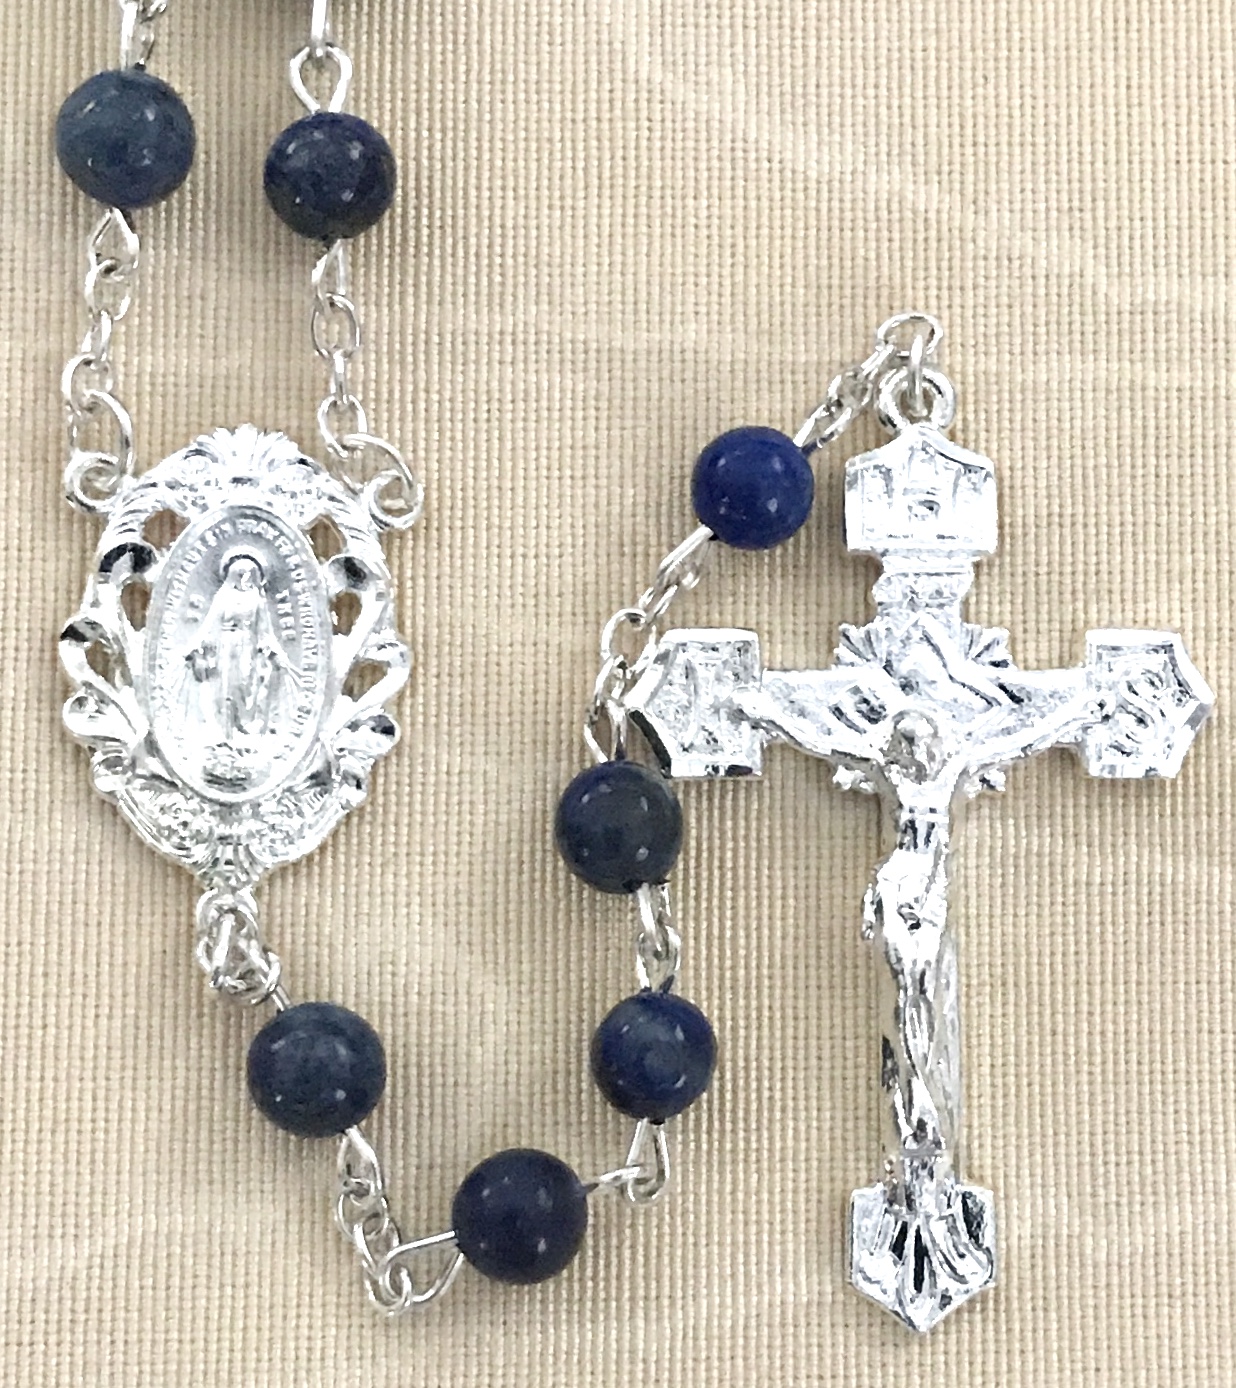 6mm LAPIS GEMSTONE ROSARY WITH STERLING SILVER PLATED CRUCIFIX AND CENTER GIFT BOXED